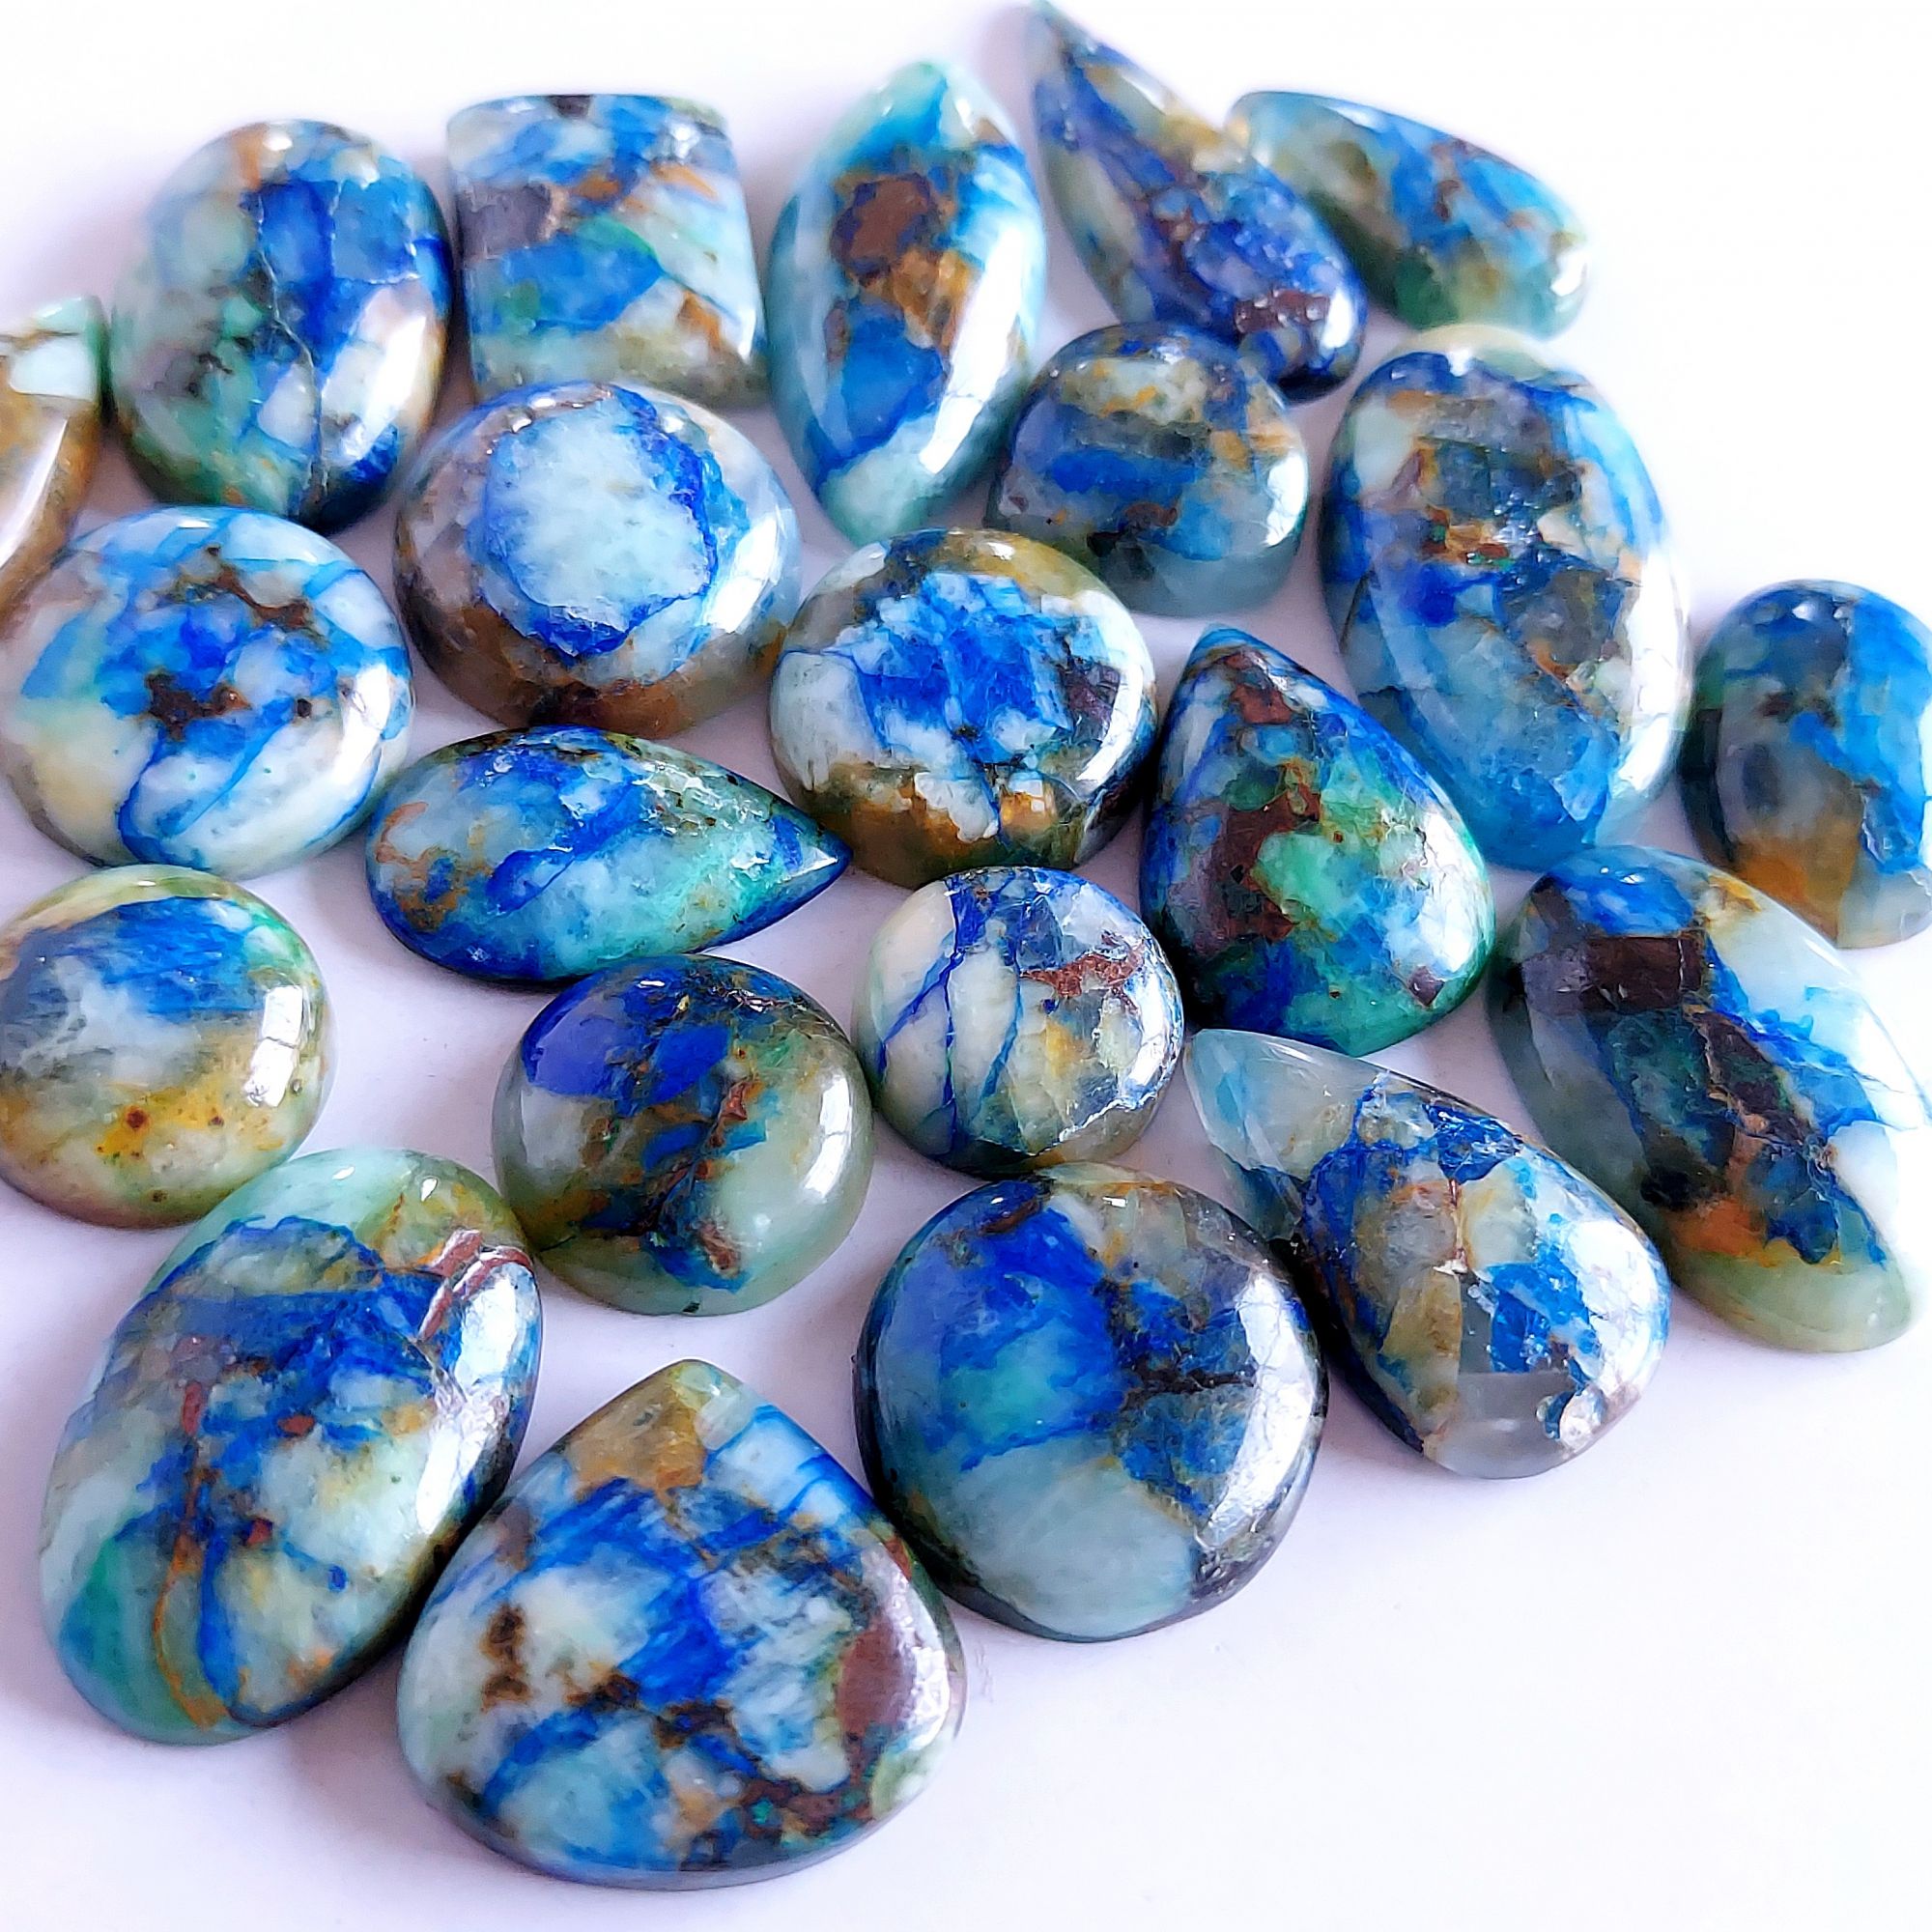 258.Cts 22 Pcs Natural Smooth Azurite Mix Loose Gemstone Cabochon Lot Size 28x12 12x12mm Wholesale Gemstone For jewelry